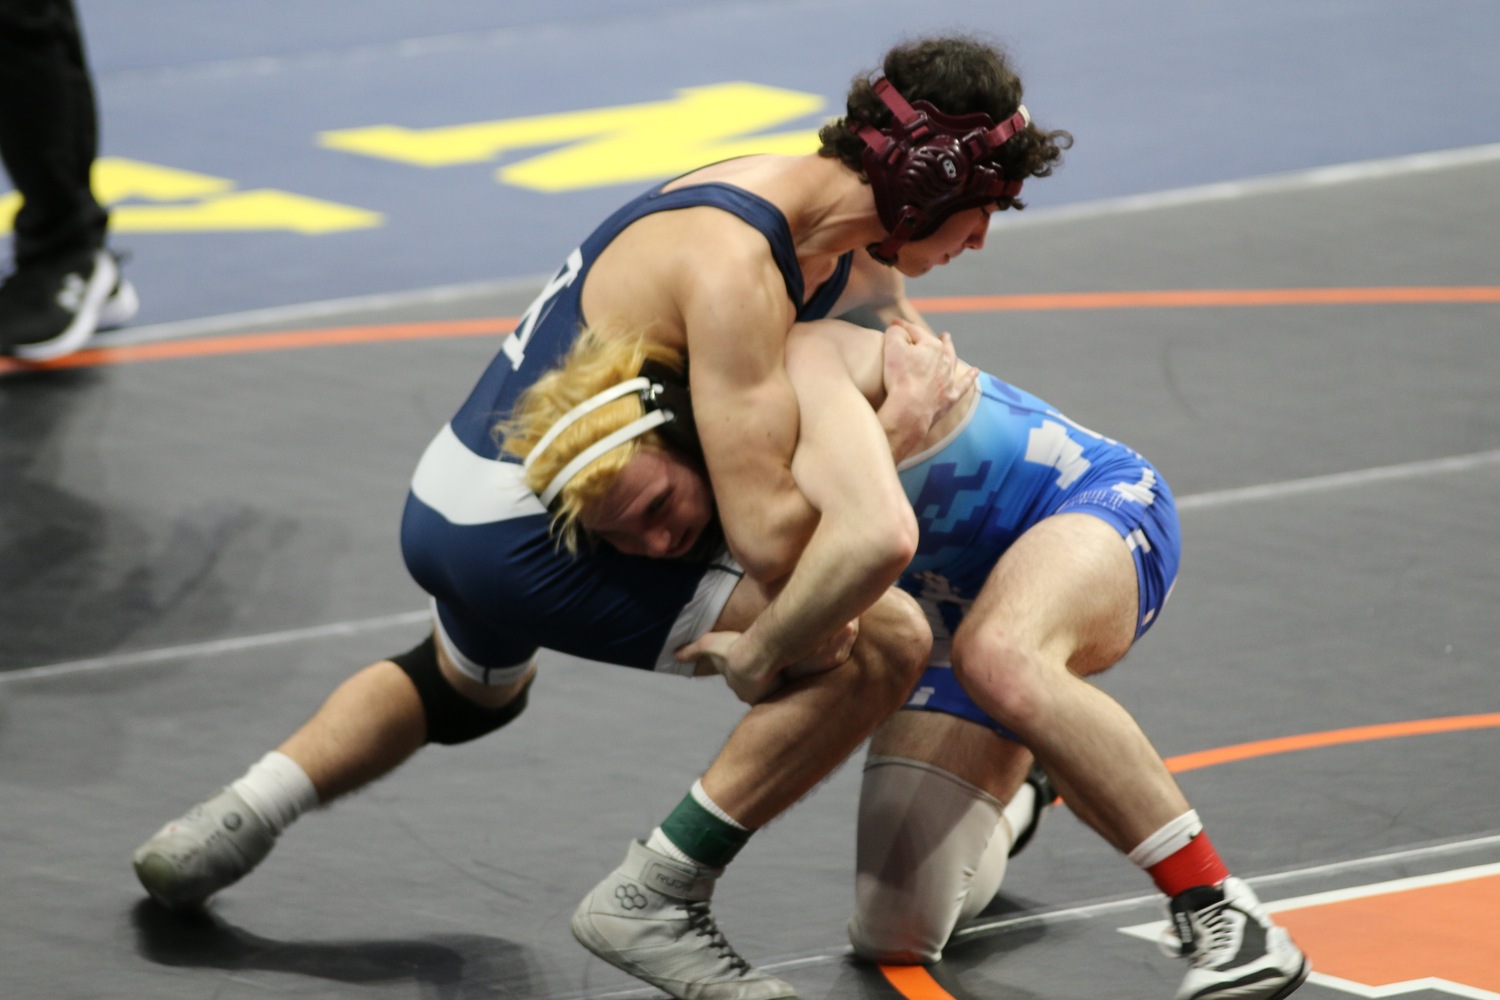 Southampton sophomore Liam Squires with a front headlock on his opponent.   ERIC NASTRI